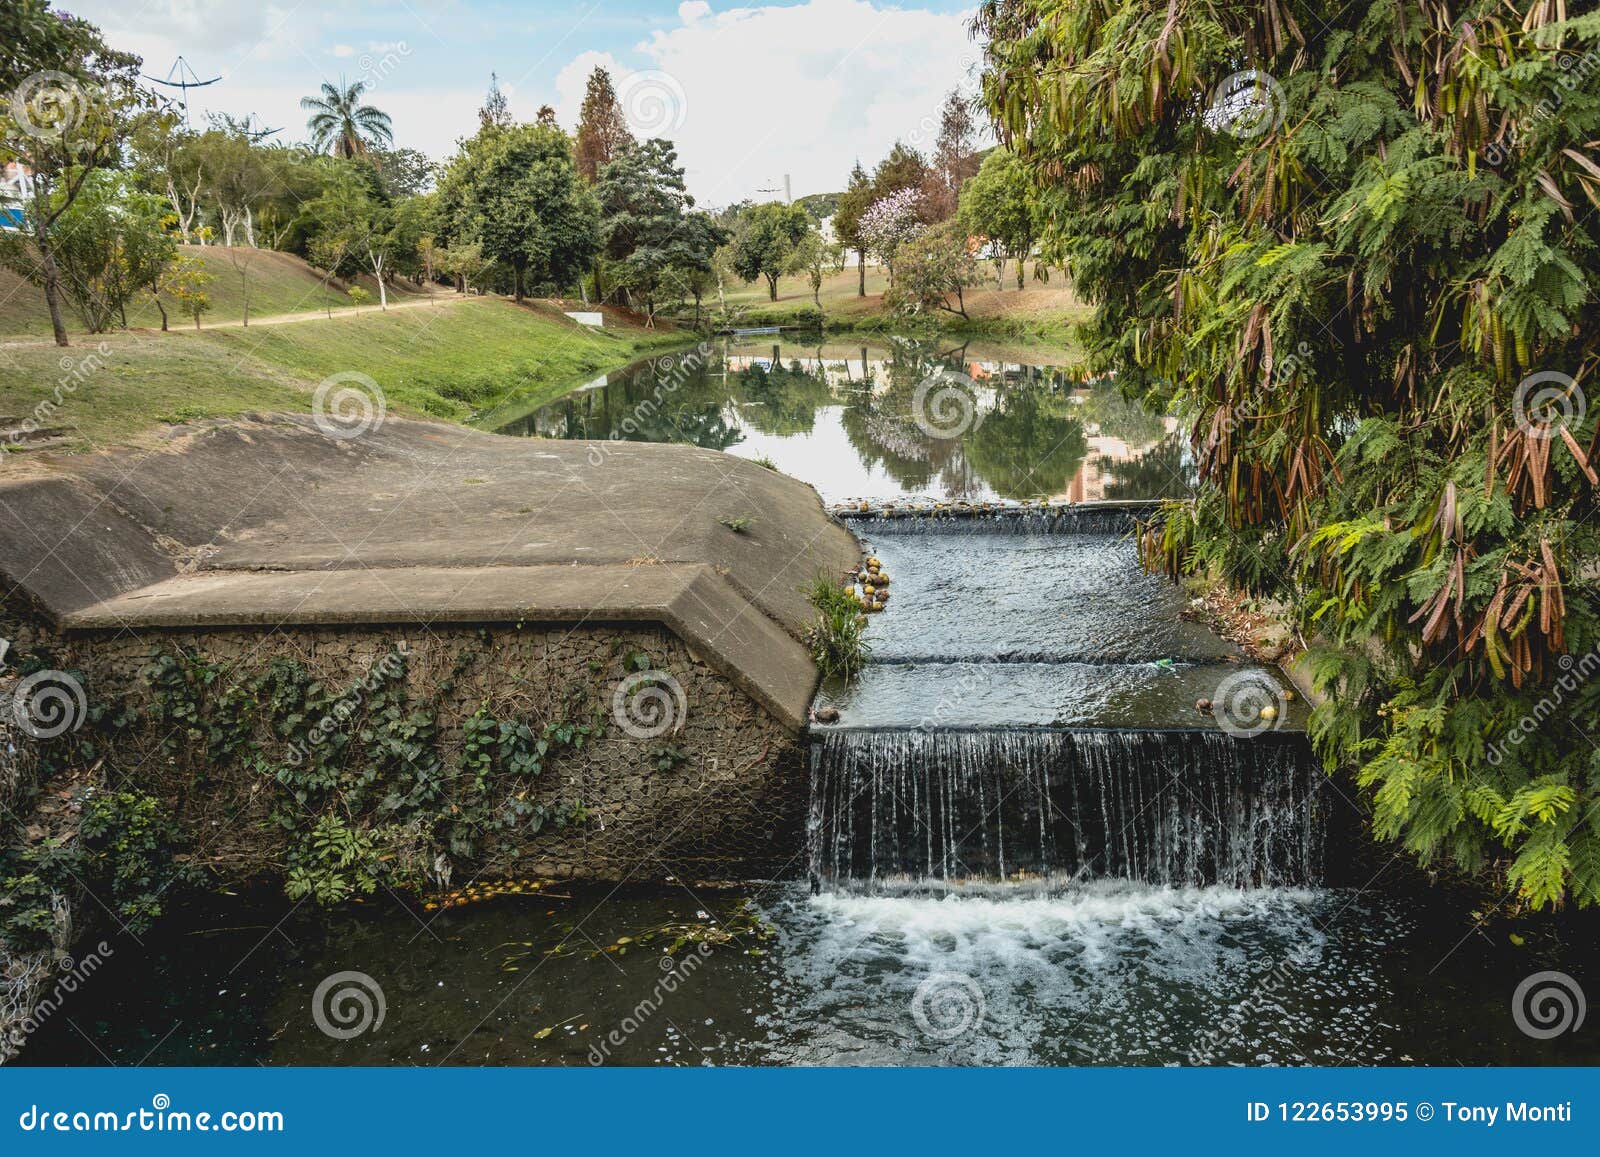 small water fall, along the river, in the ecological park, in in